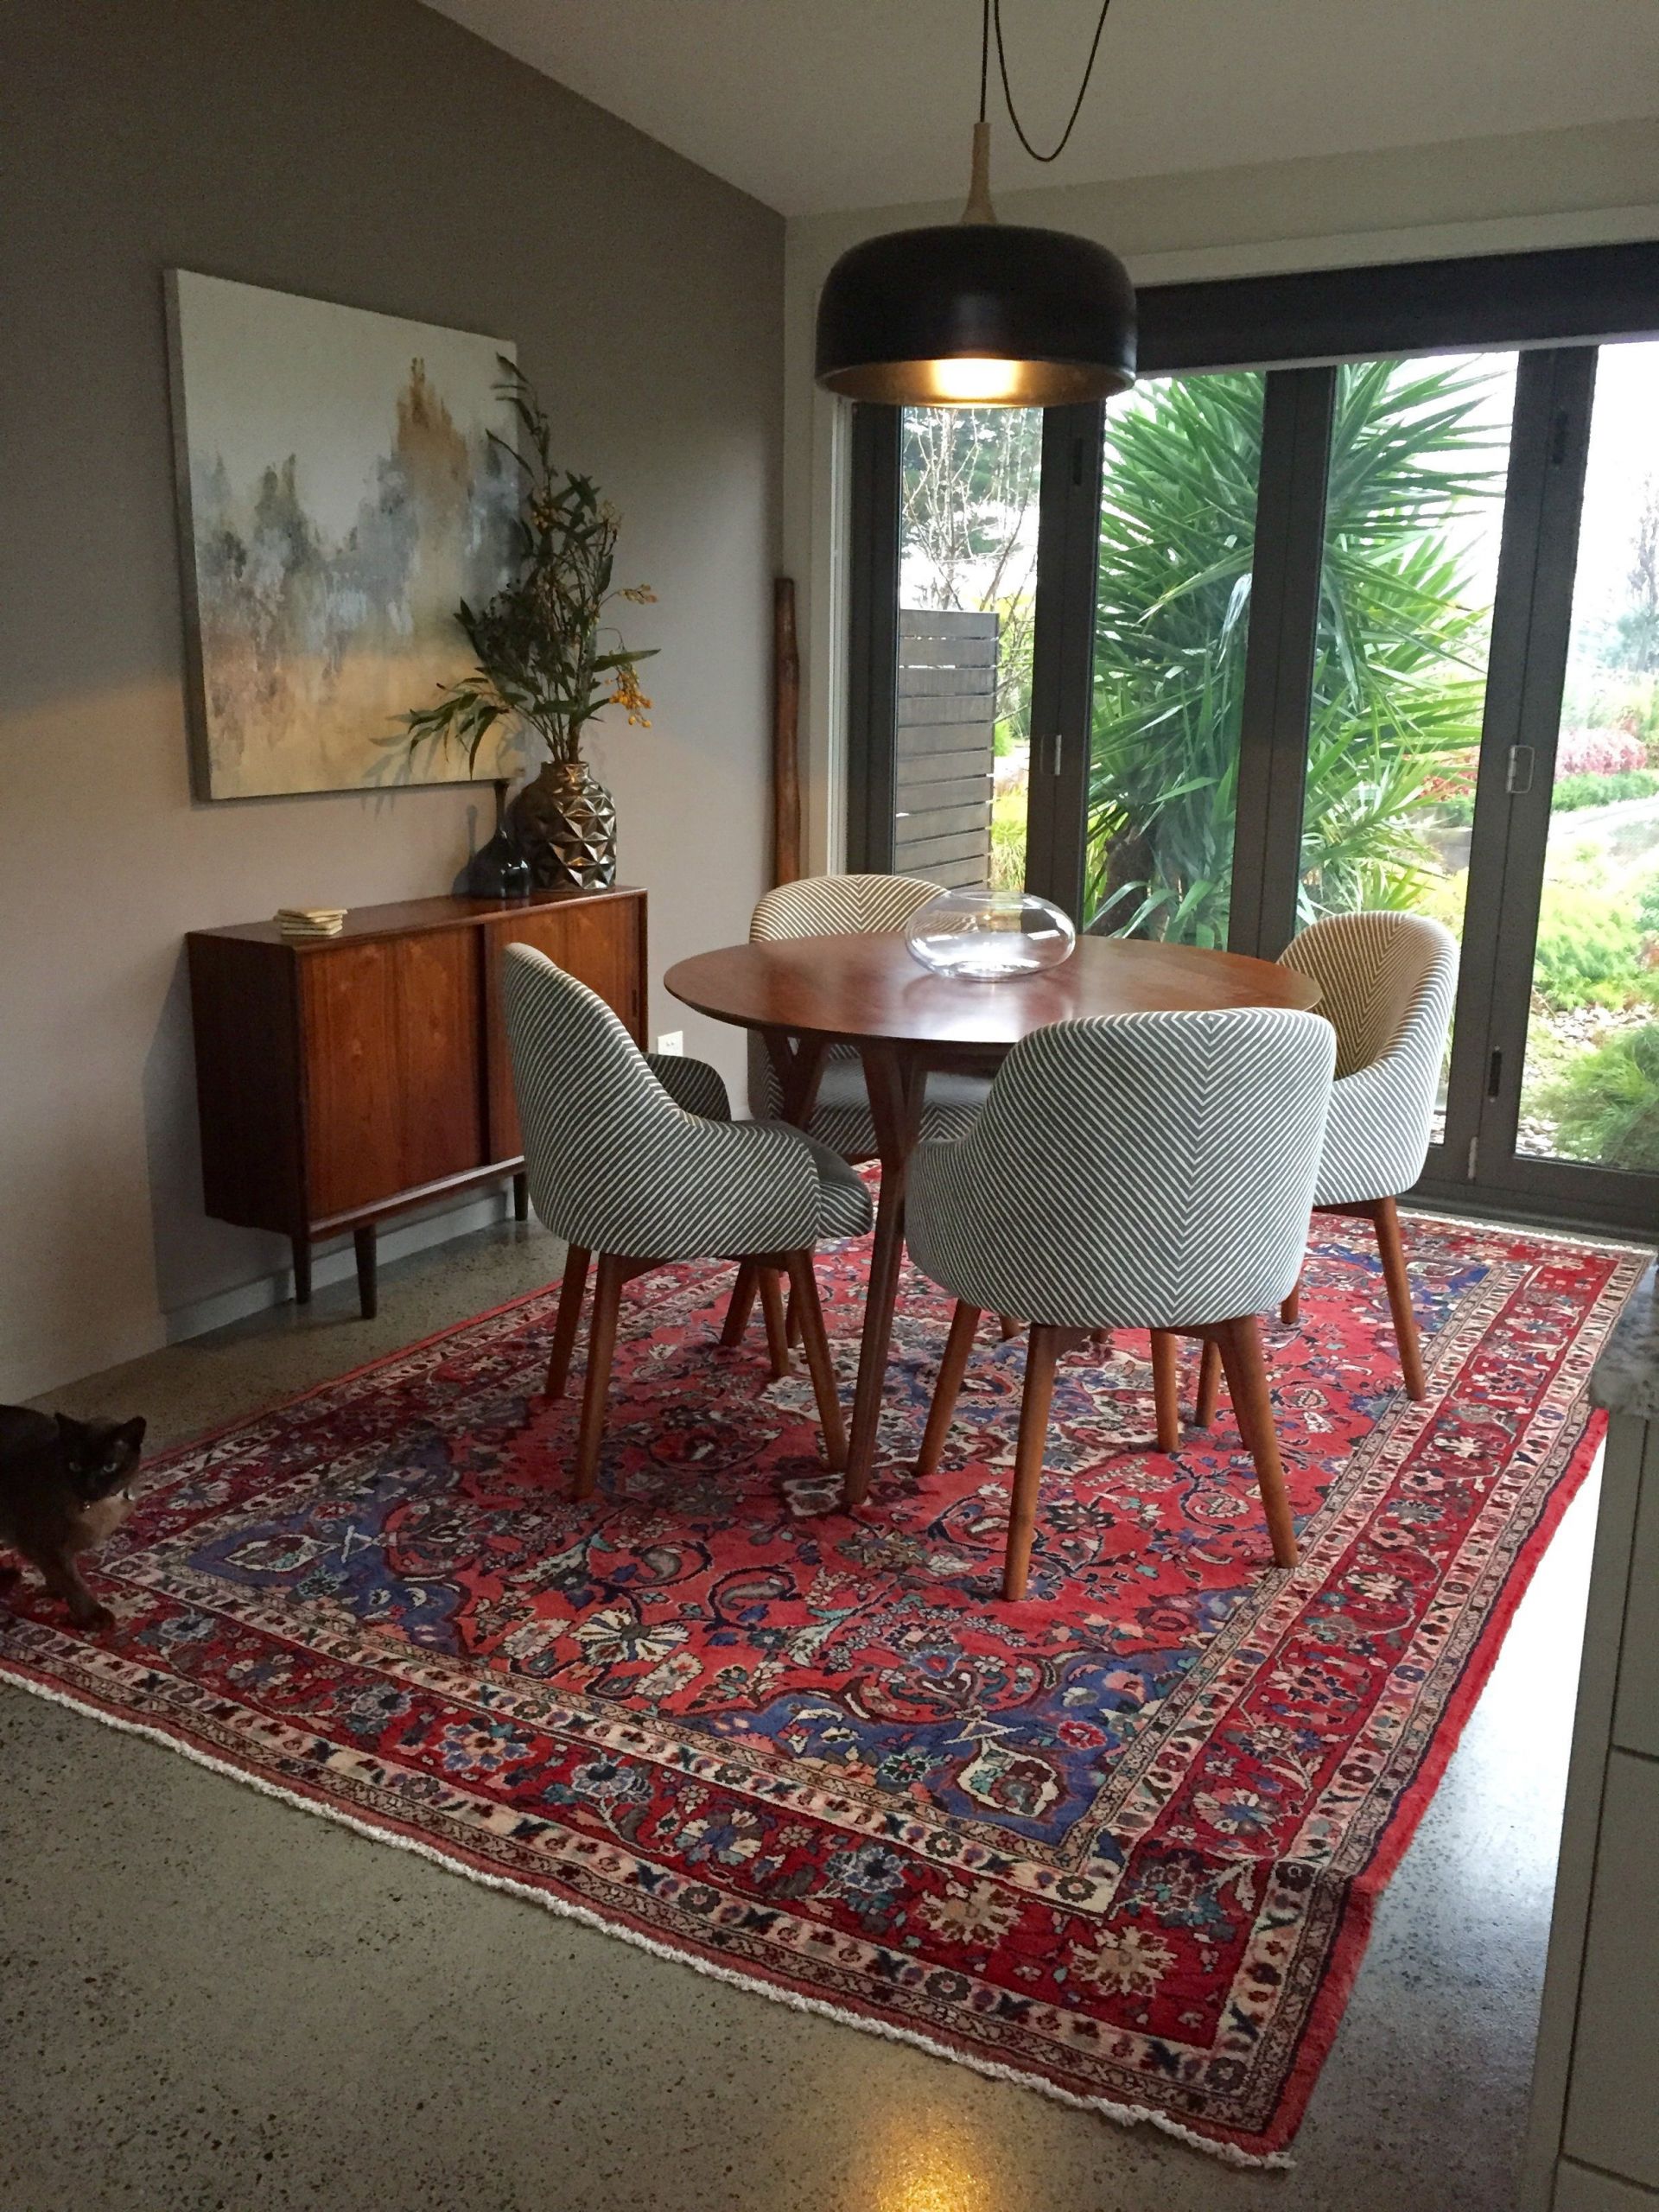 Persian Rug Living Room
 Image result for modern decorating with persian rugs